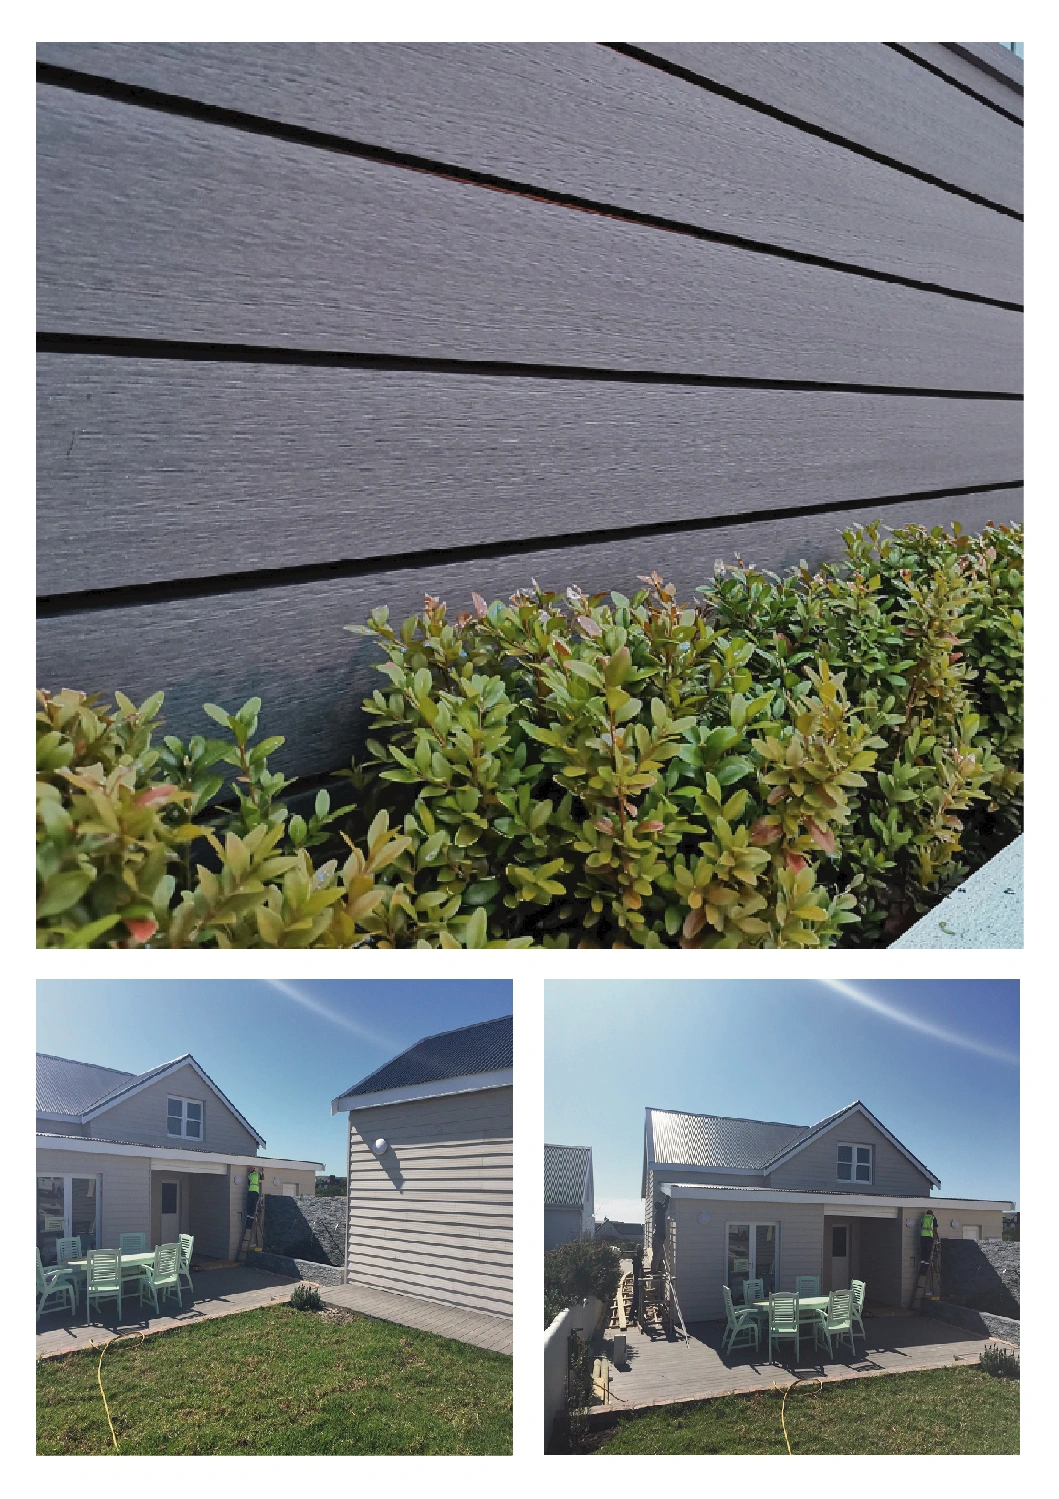 Exterior Co-Extrusion WPC Cladding Wood Plastic Composite Wall Panel